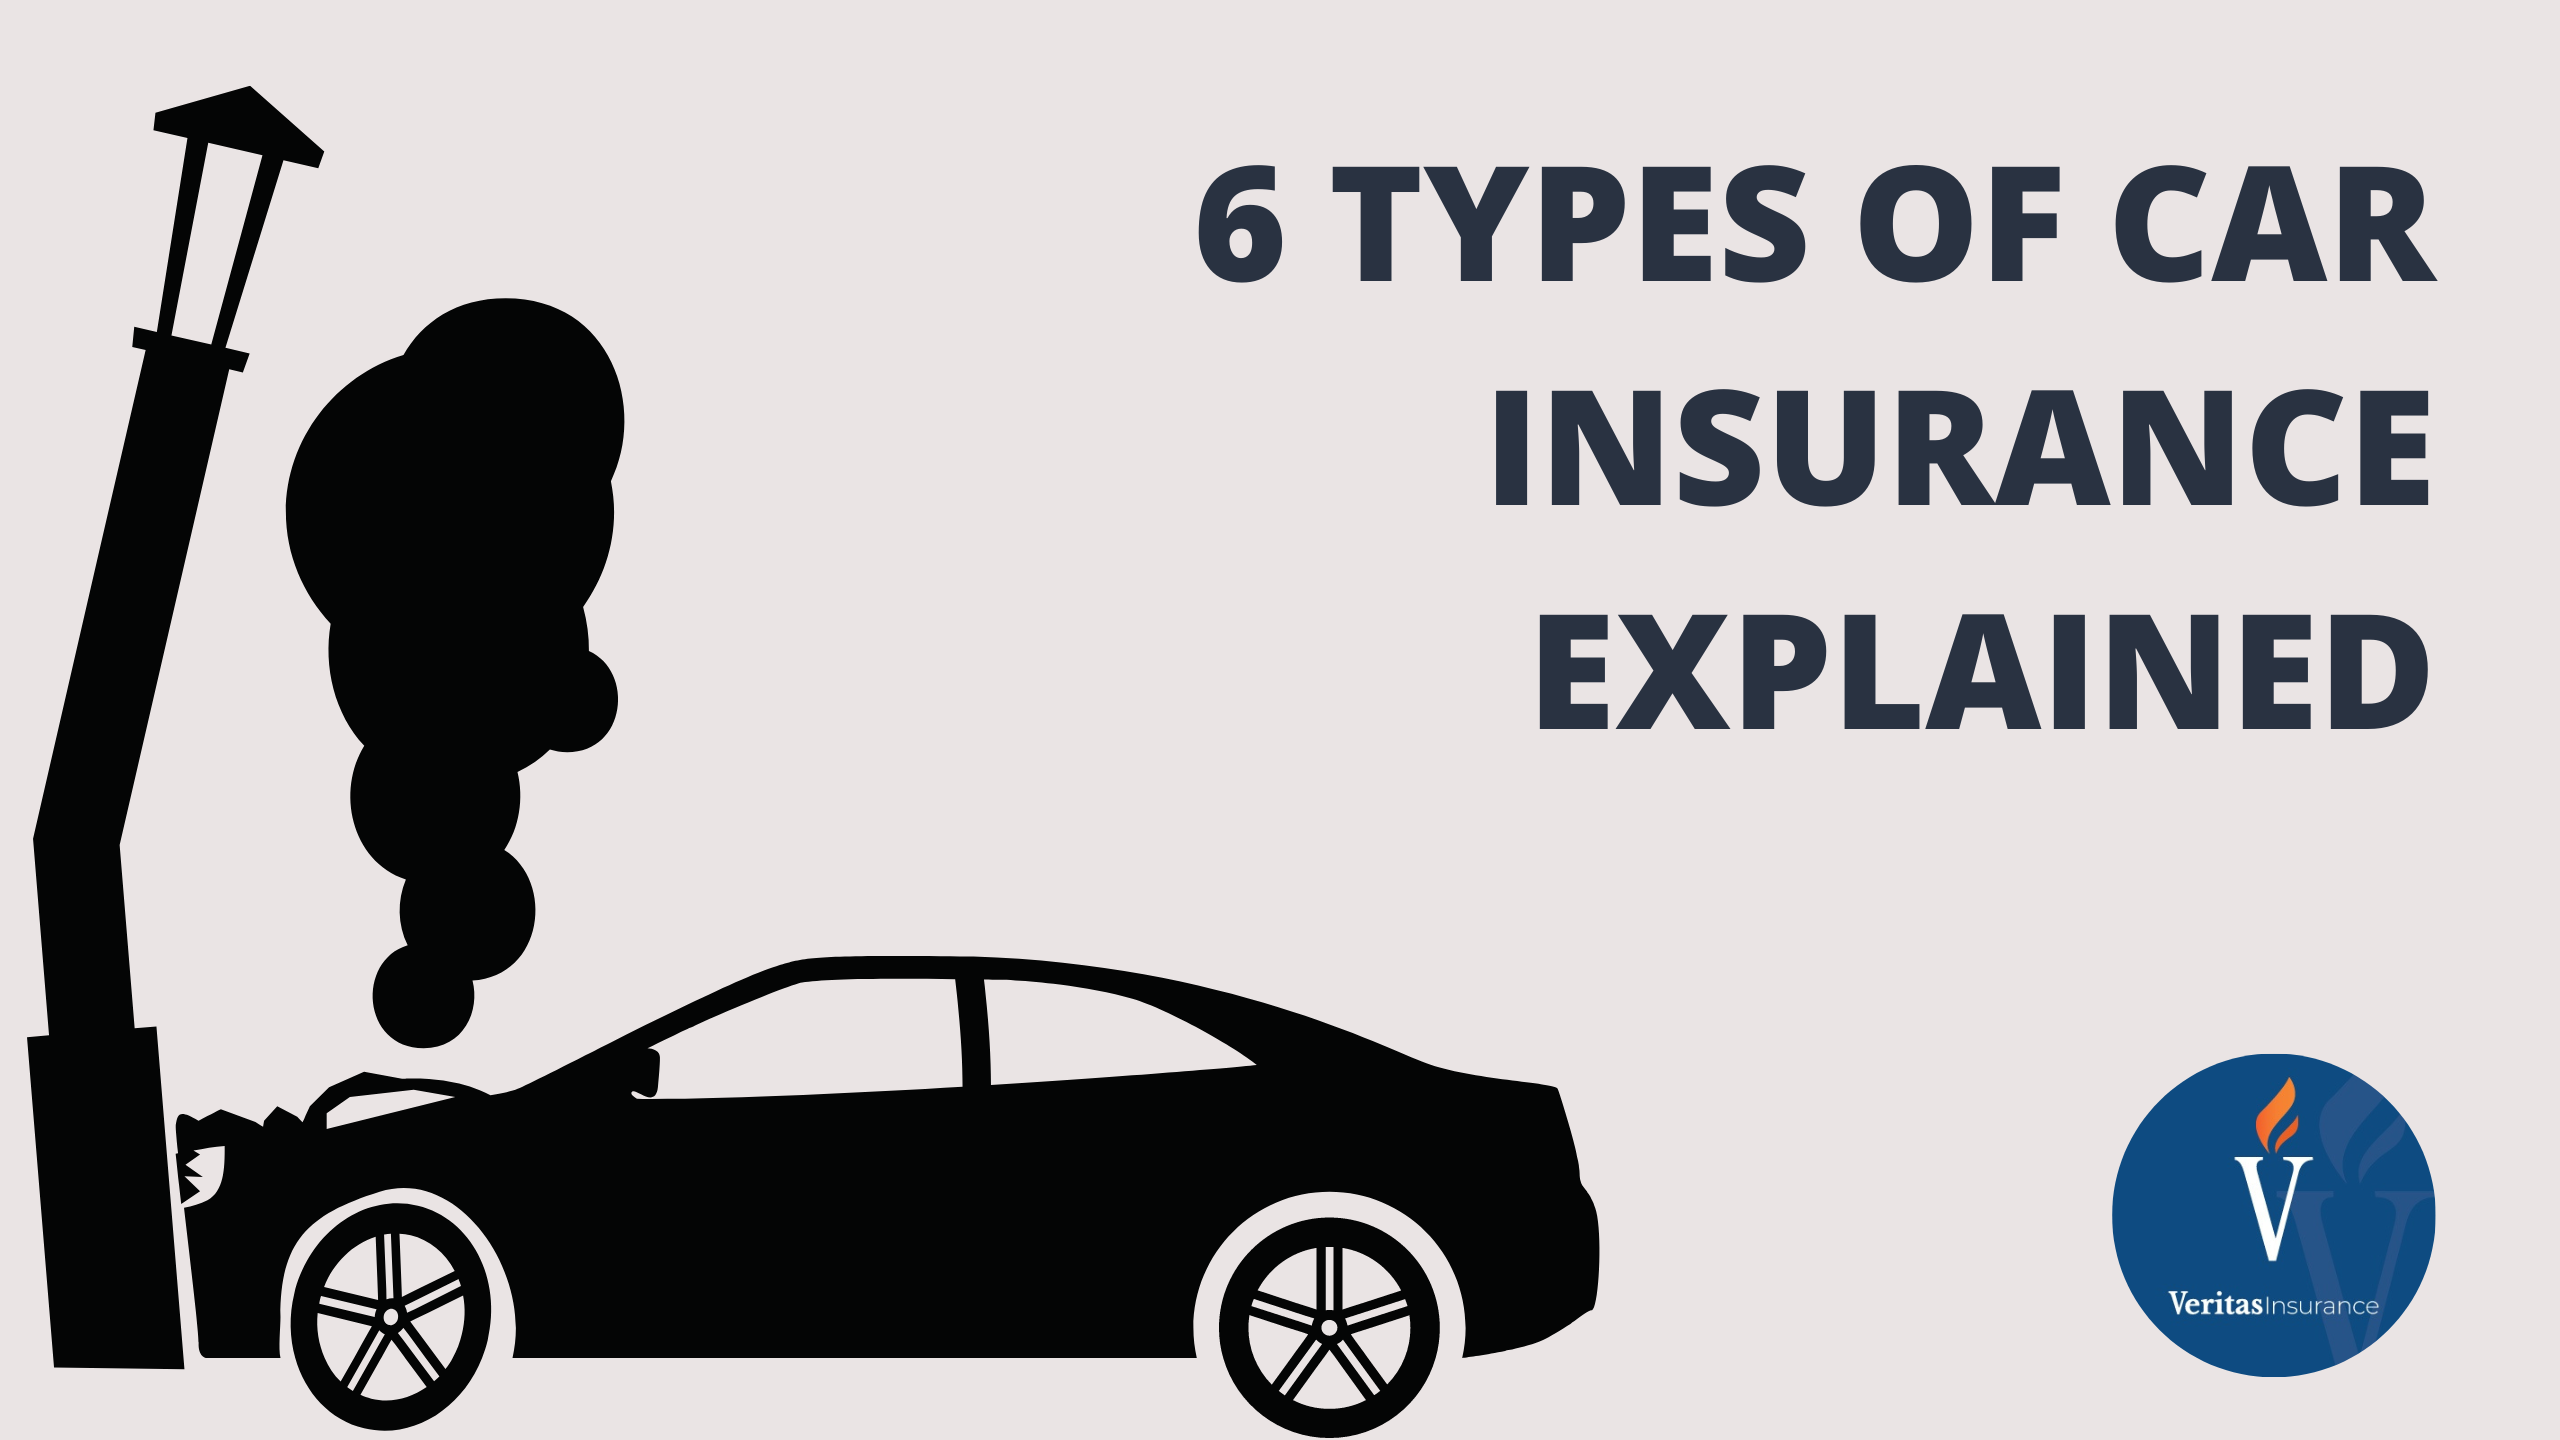 Types of Auto Insurance: Which Do I Need?